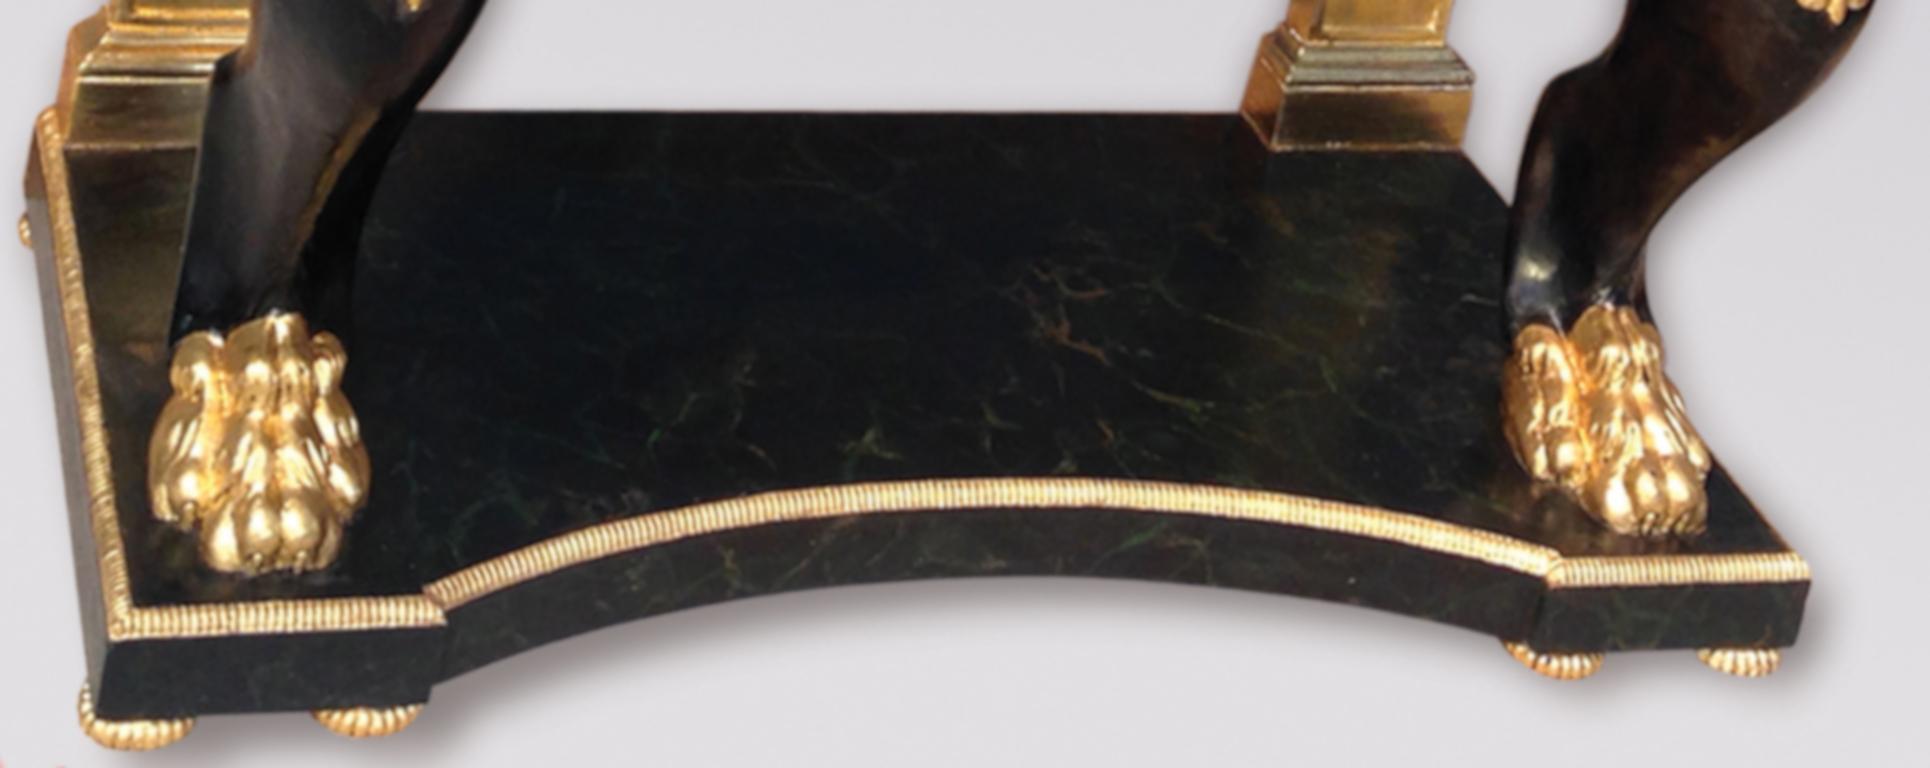 British Pair of 19th Century Regency Gilt and Ebonized Console Tables For Sale